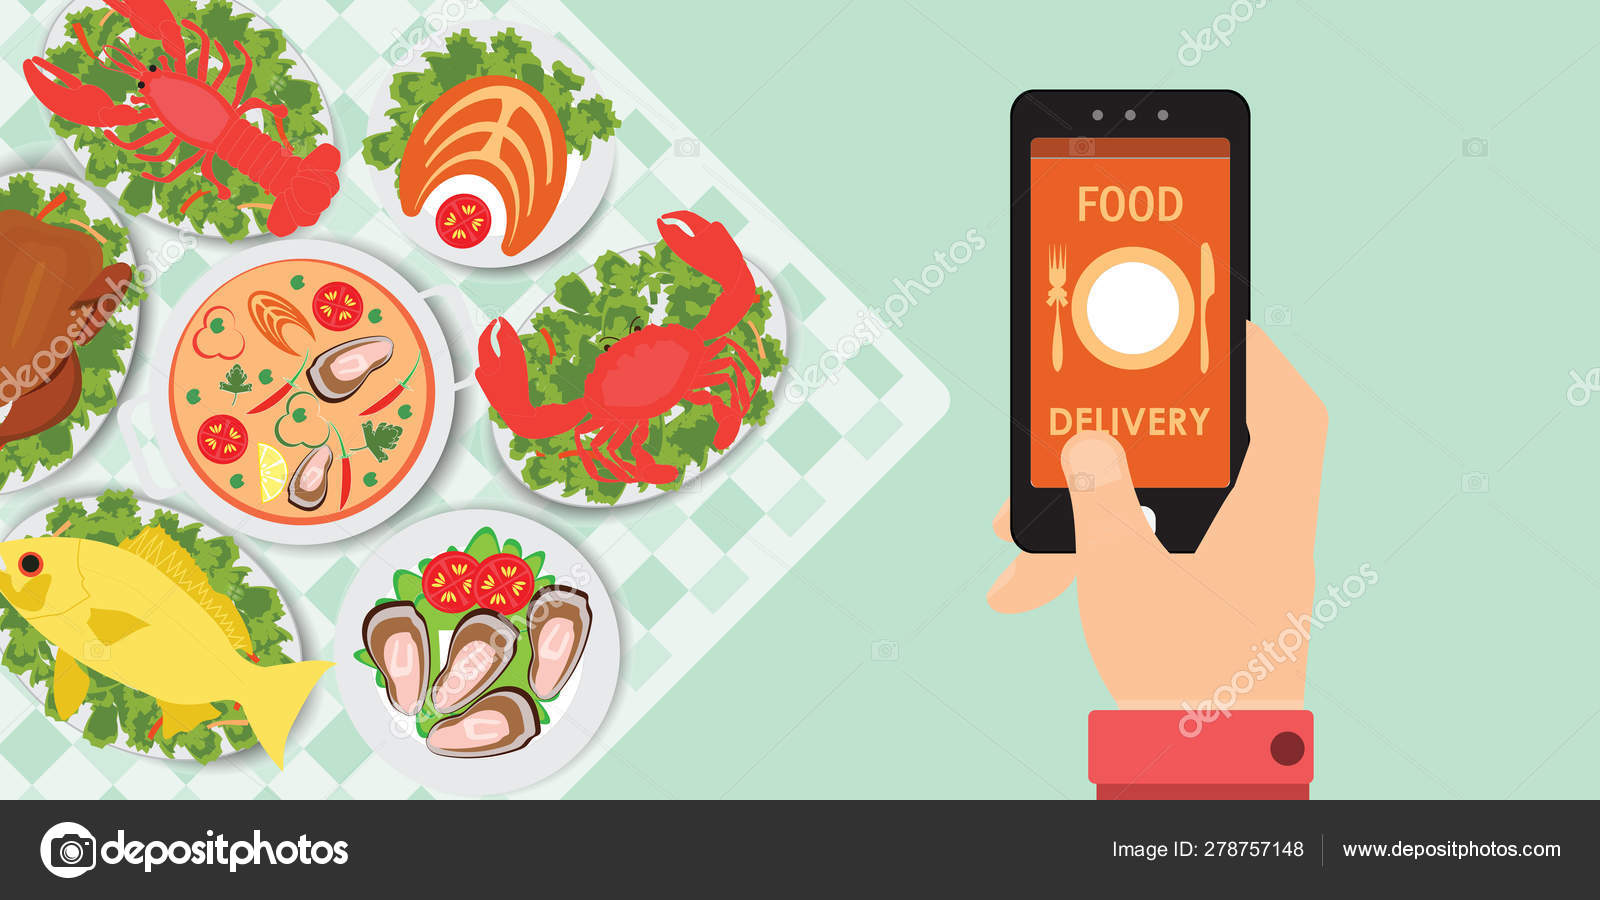 Food Delivery App On A Smartphone With Foods. — Векторное 